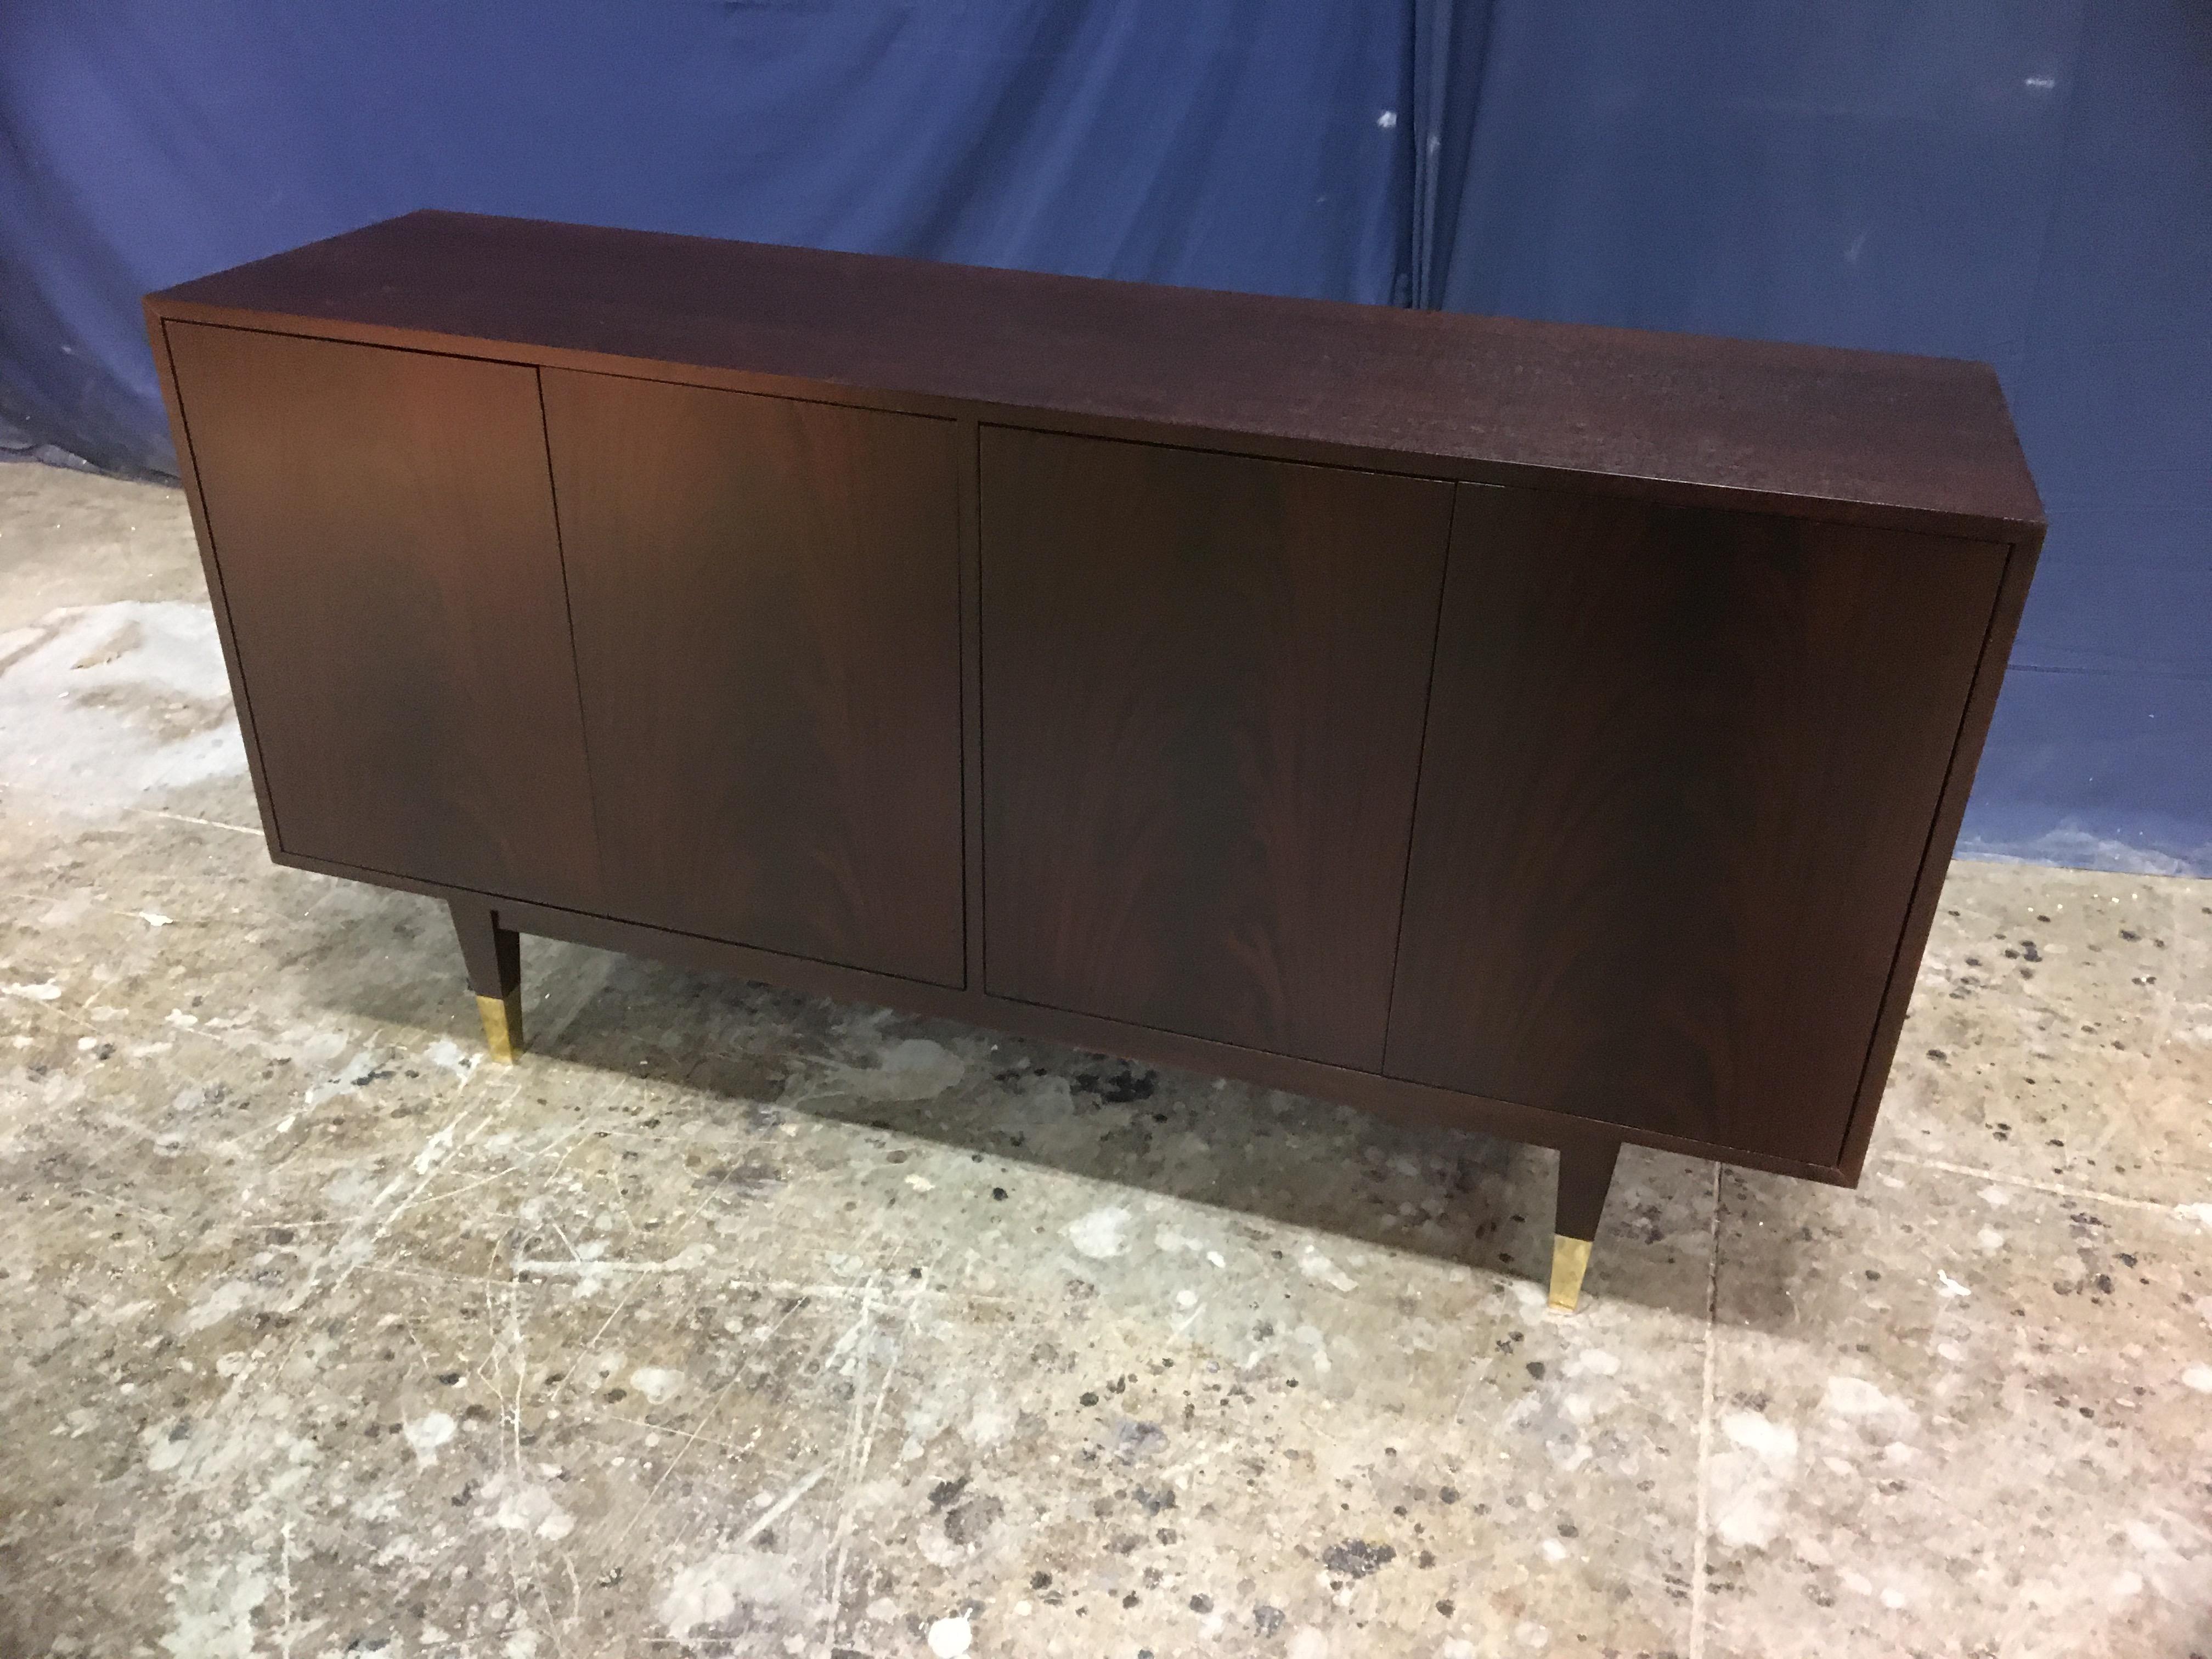 This is made-to-order midcentury style mahogany four door sideboard/credenza made in the Leighton Hall shop. It features four doors with swirly crotch mahogany and a top and sides of understated cathedral mahogany. It has square tapered legs which